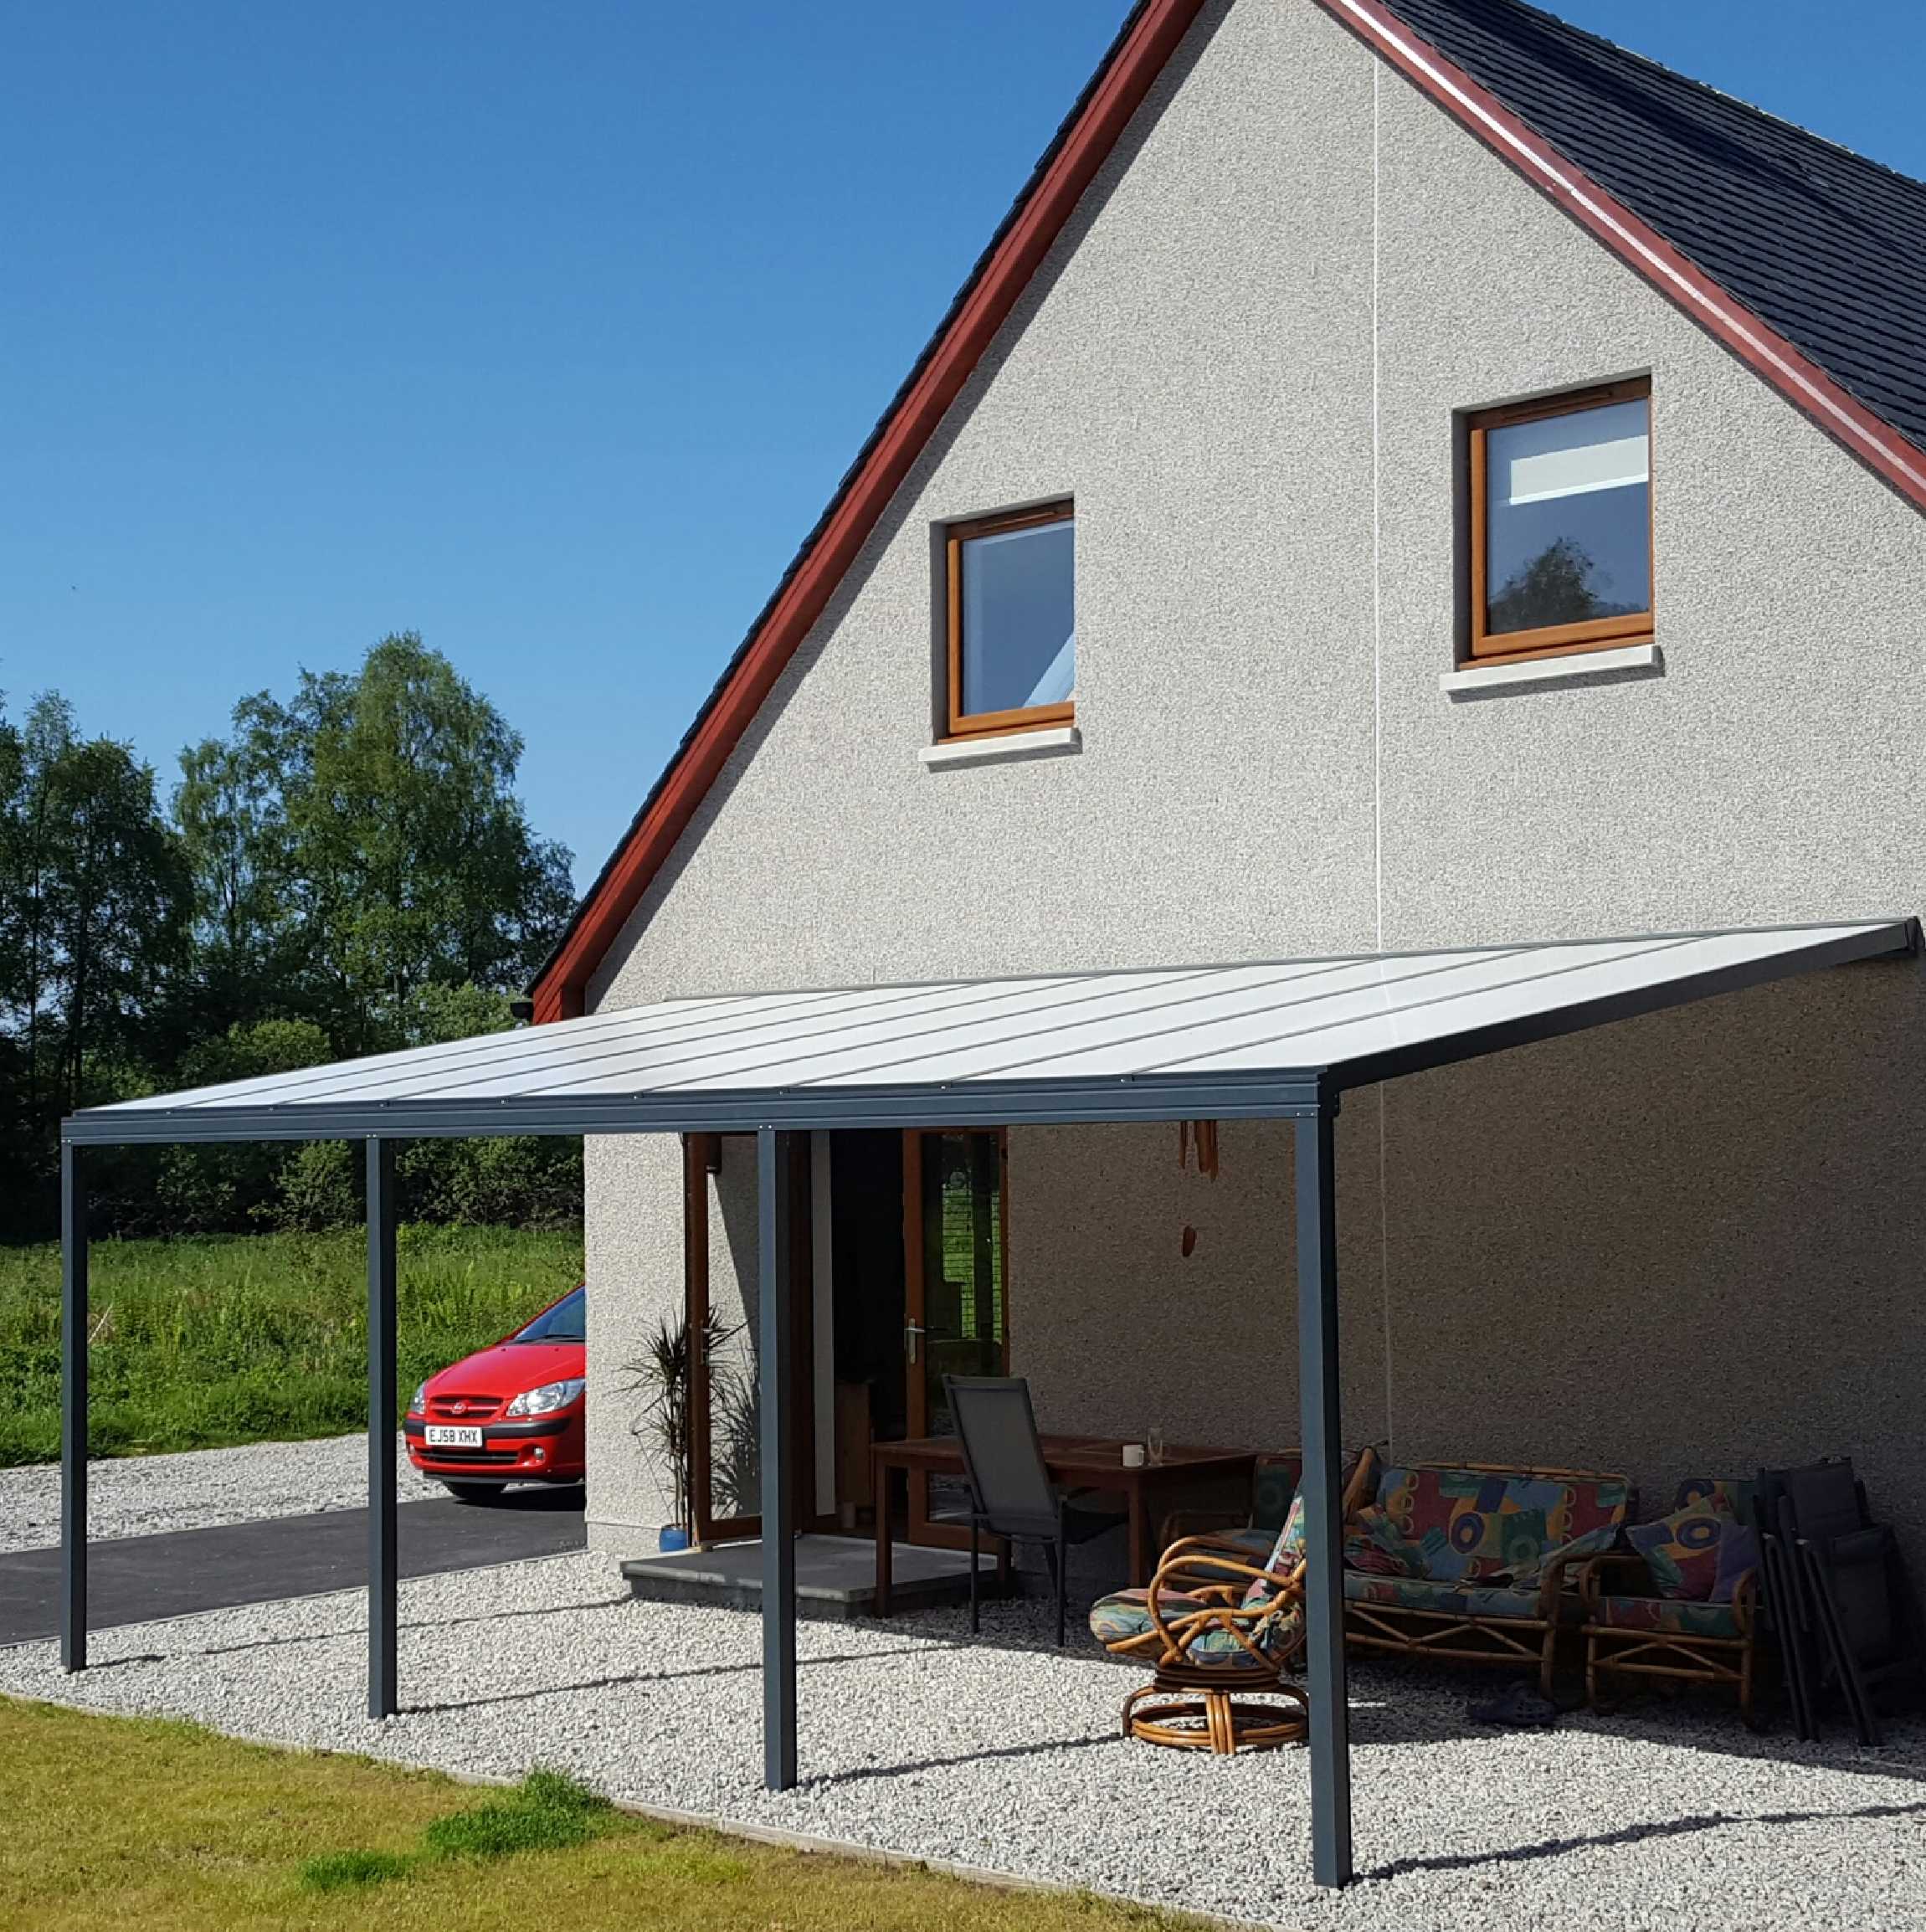 Great selection of SPECIAL OFFER Omega Smart Lean-To Canopy, Anthracite Grey, 16mm Polycarbonate Glazing - 3.1m (W) x 2.0m (P), (2) Supporting Posts